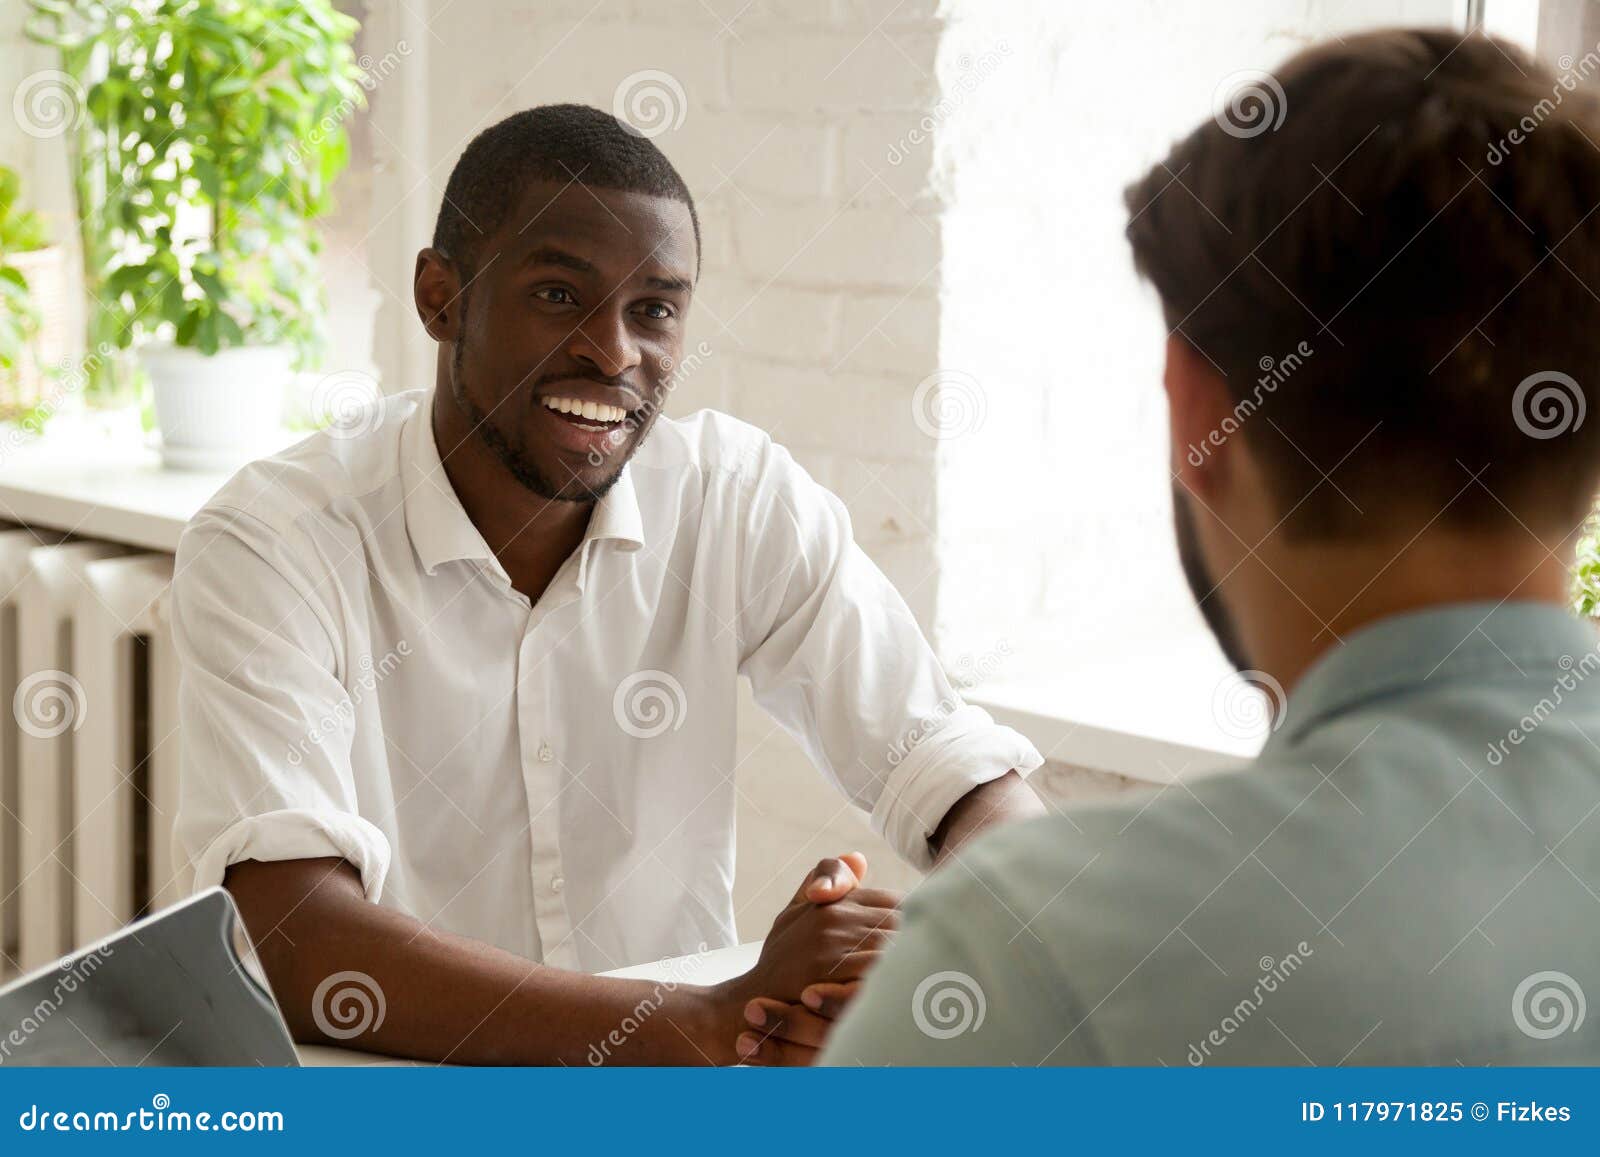 colleagues having conversation chatting at workplace